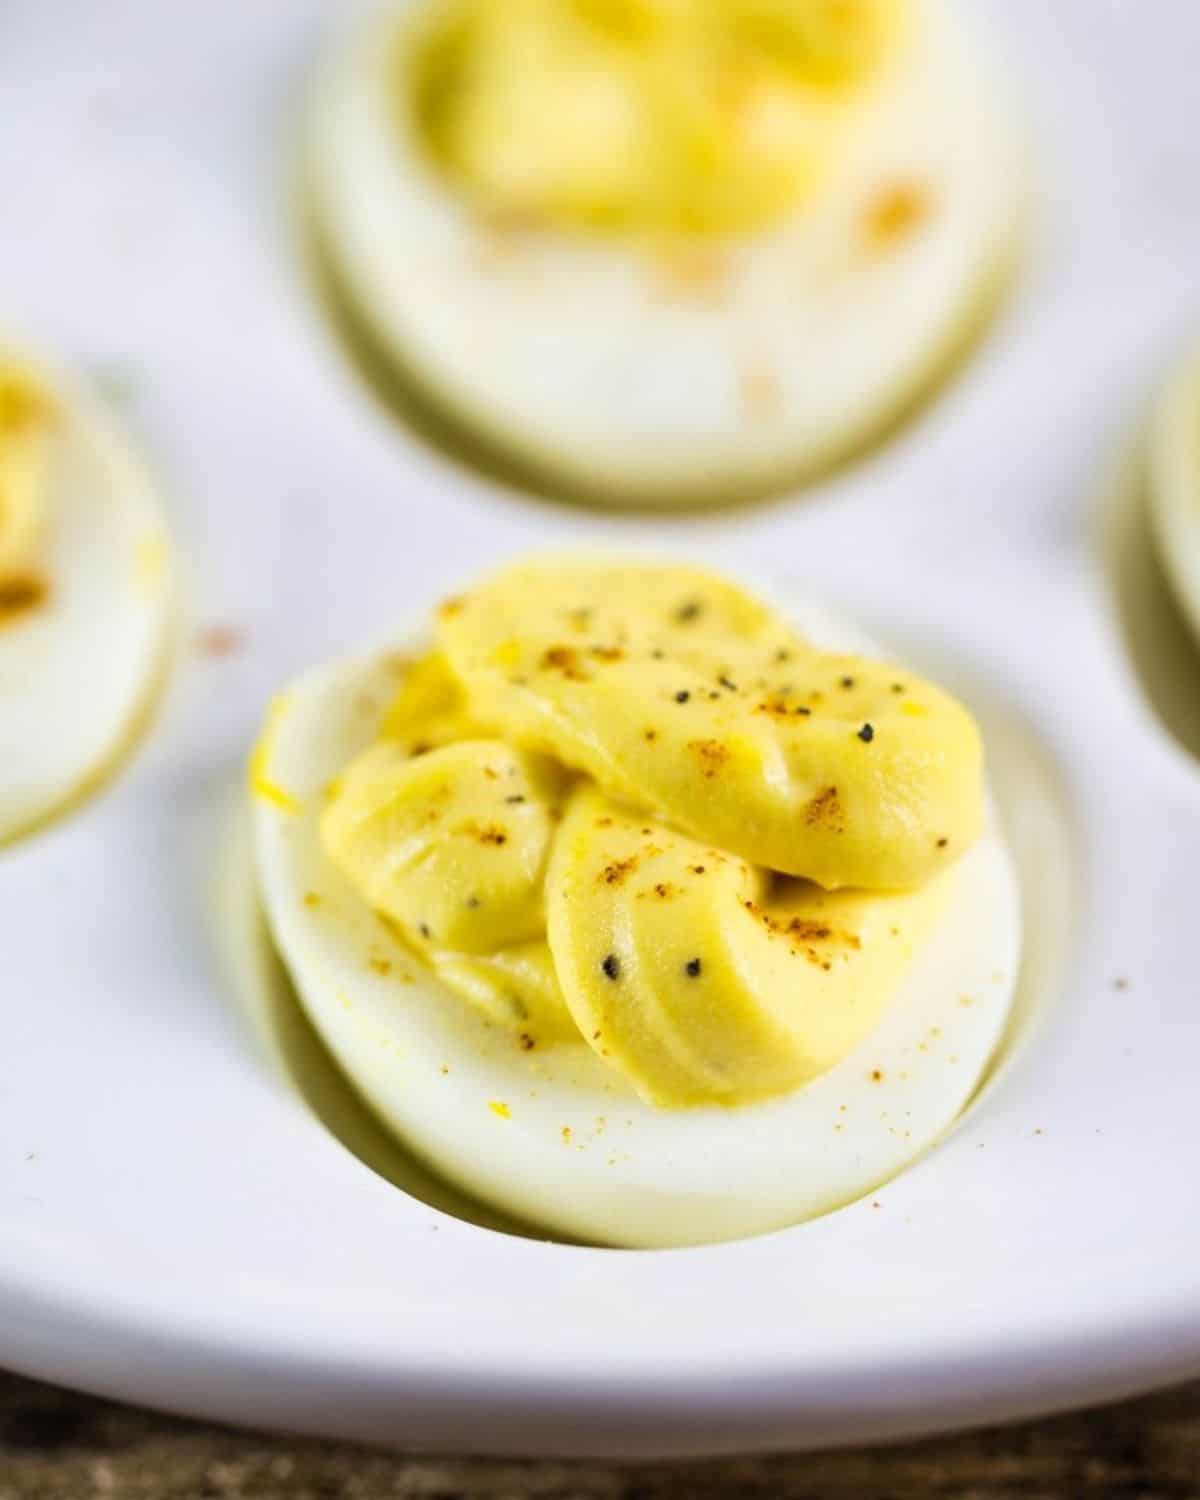 A deviled egg topped with a sprinkle of paprika and cracked black pepper on a white plate.